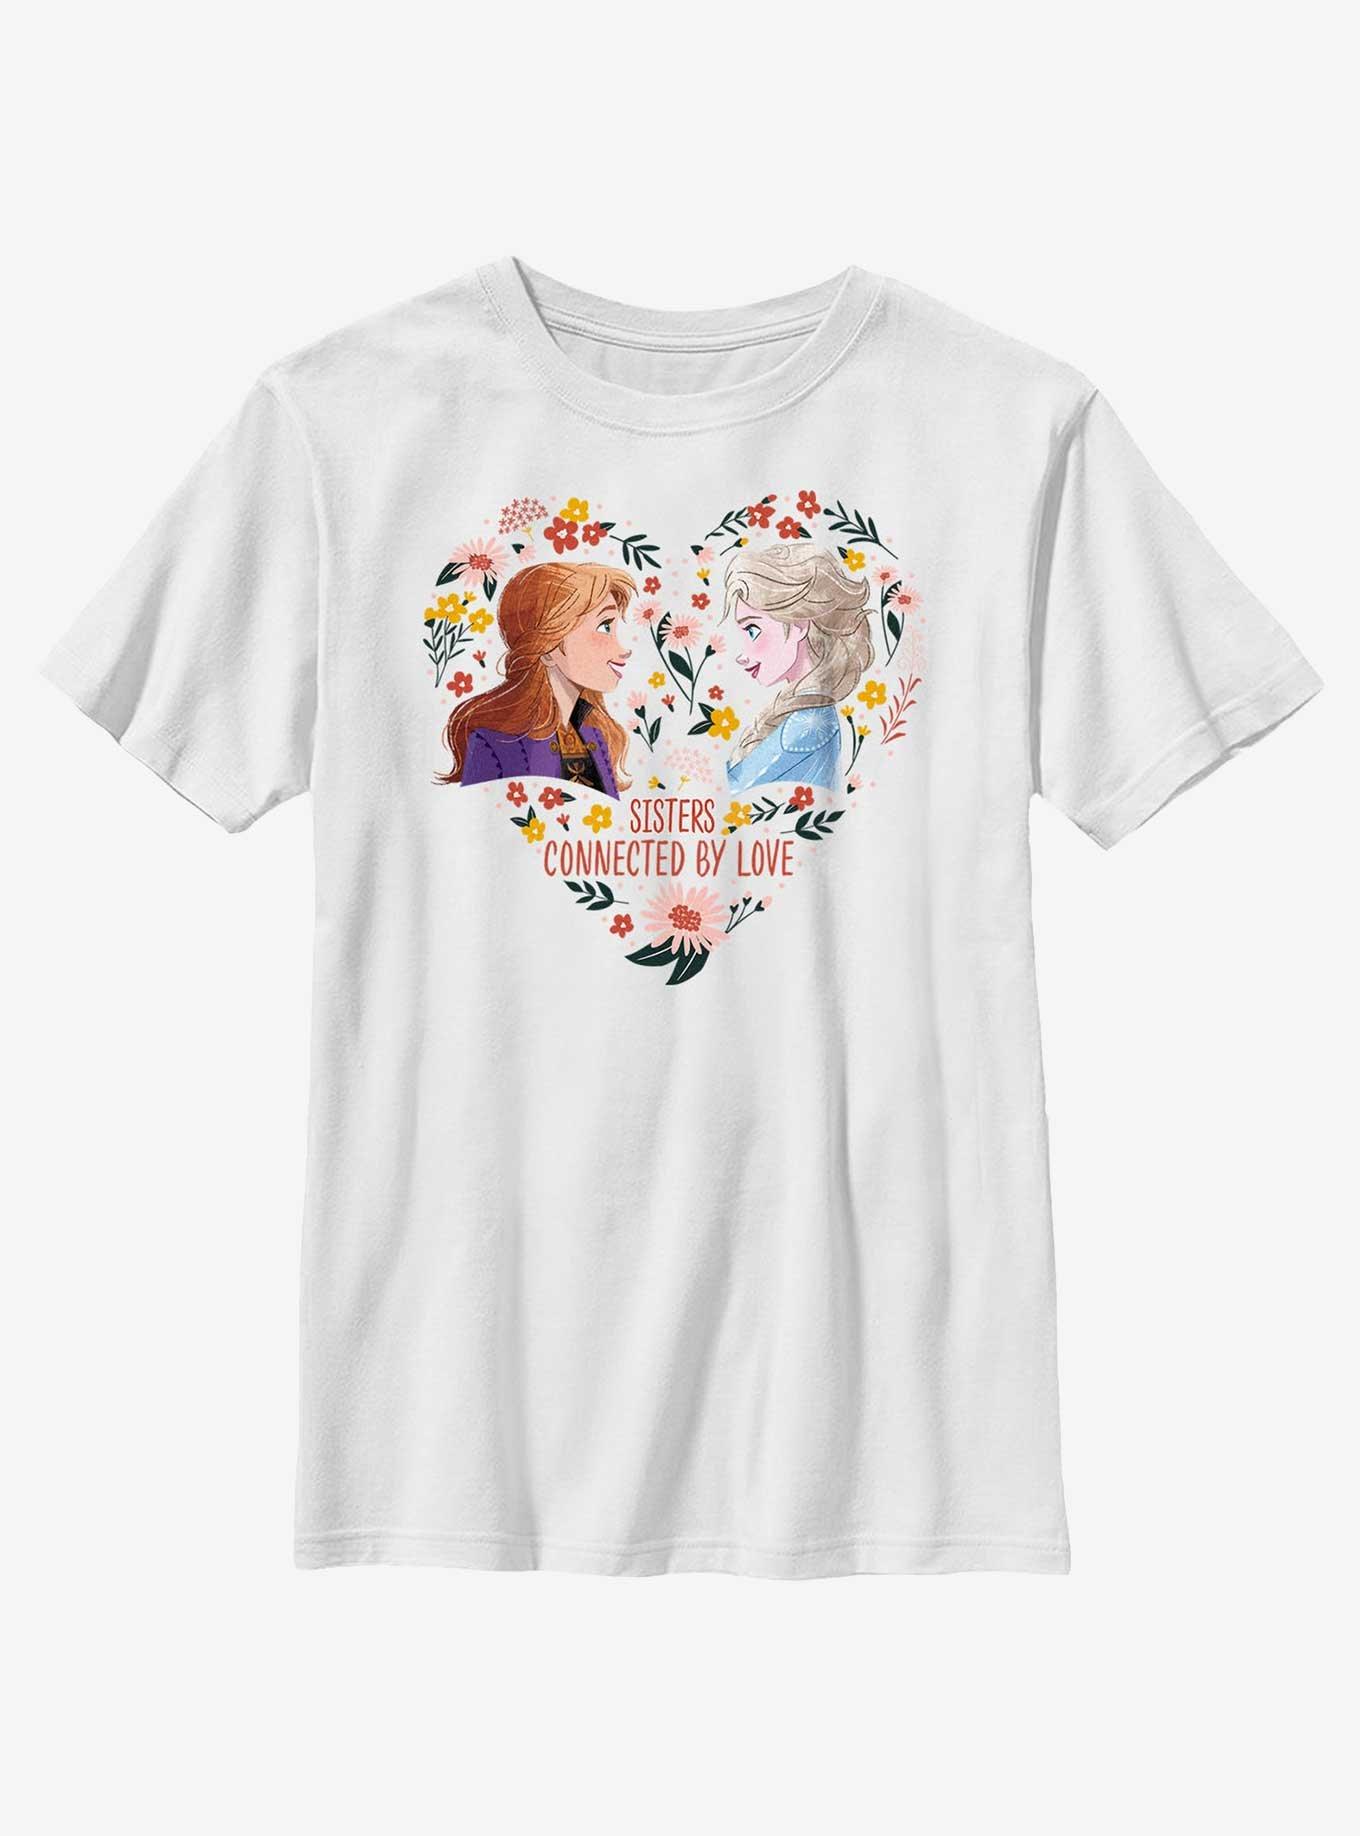 Disney Frozen Anna & Elsa Sisters Connected By Love Youth T-Shirt, WHITE, hi-res